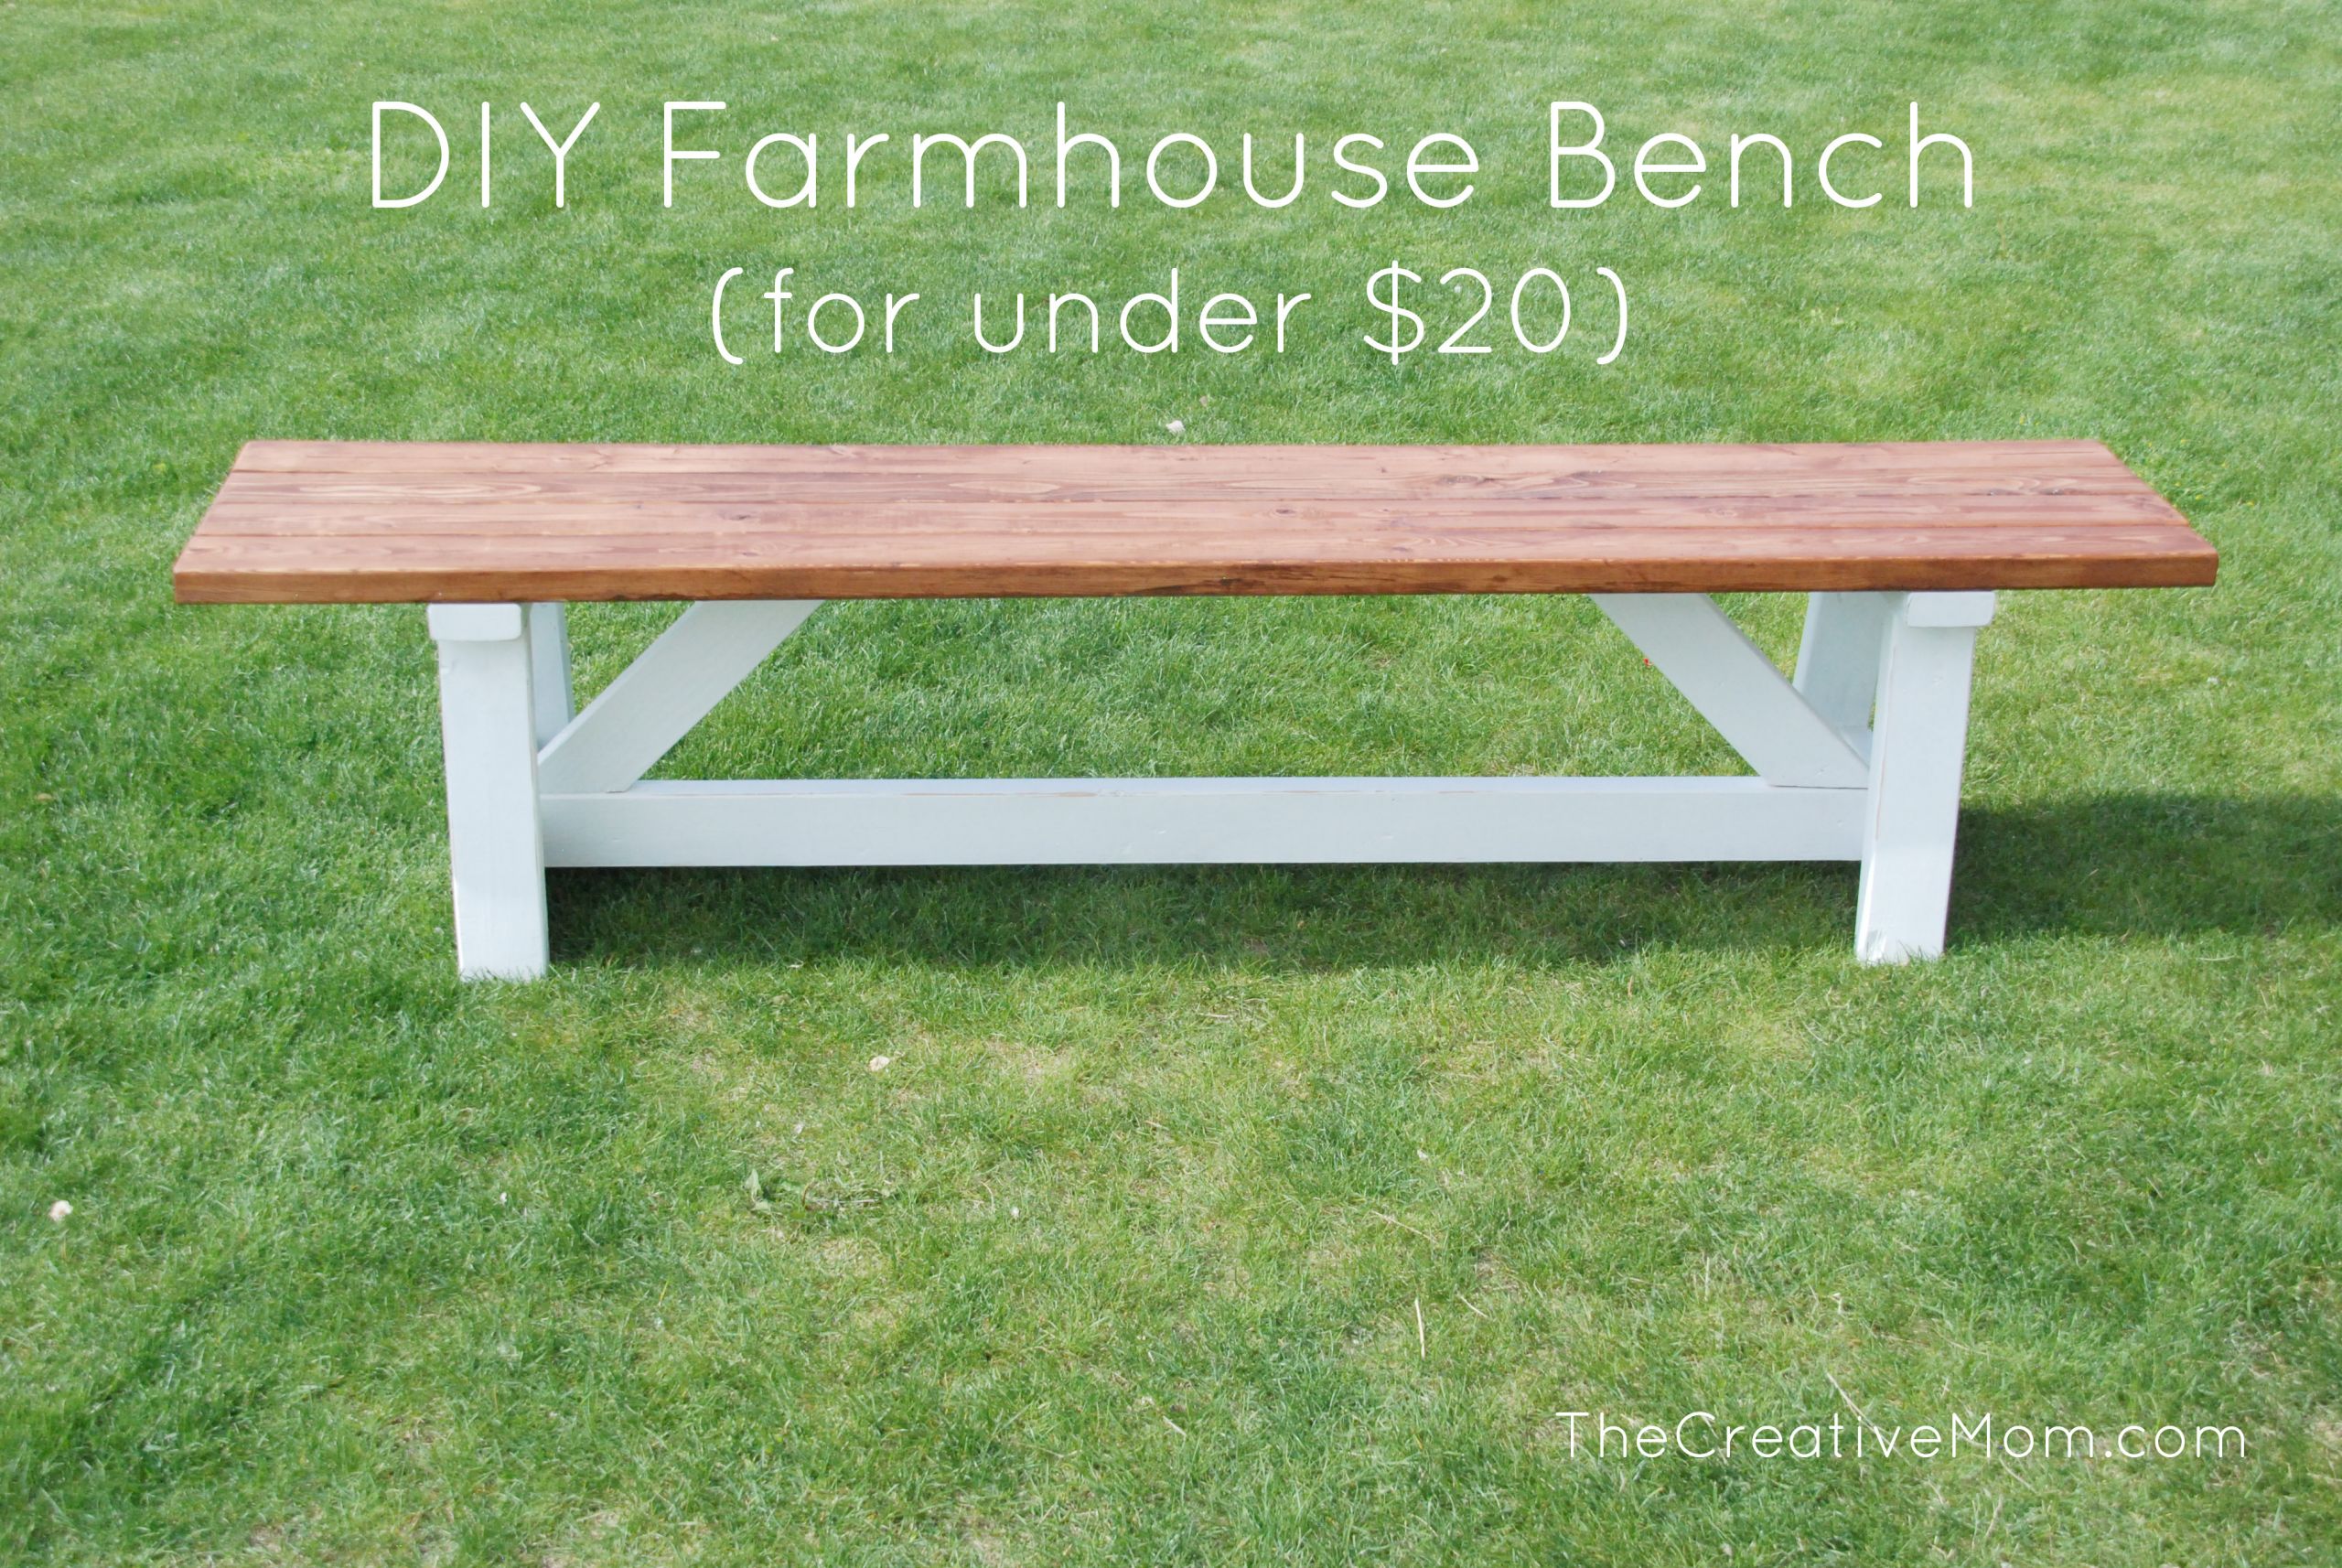 DIY Outdoor Bench With Back
 DIY Farmhouse Bench for under $20 RYOBI Nation Projects